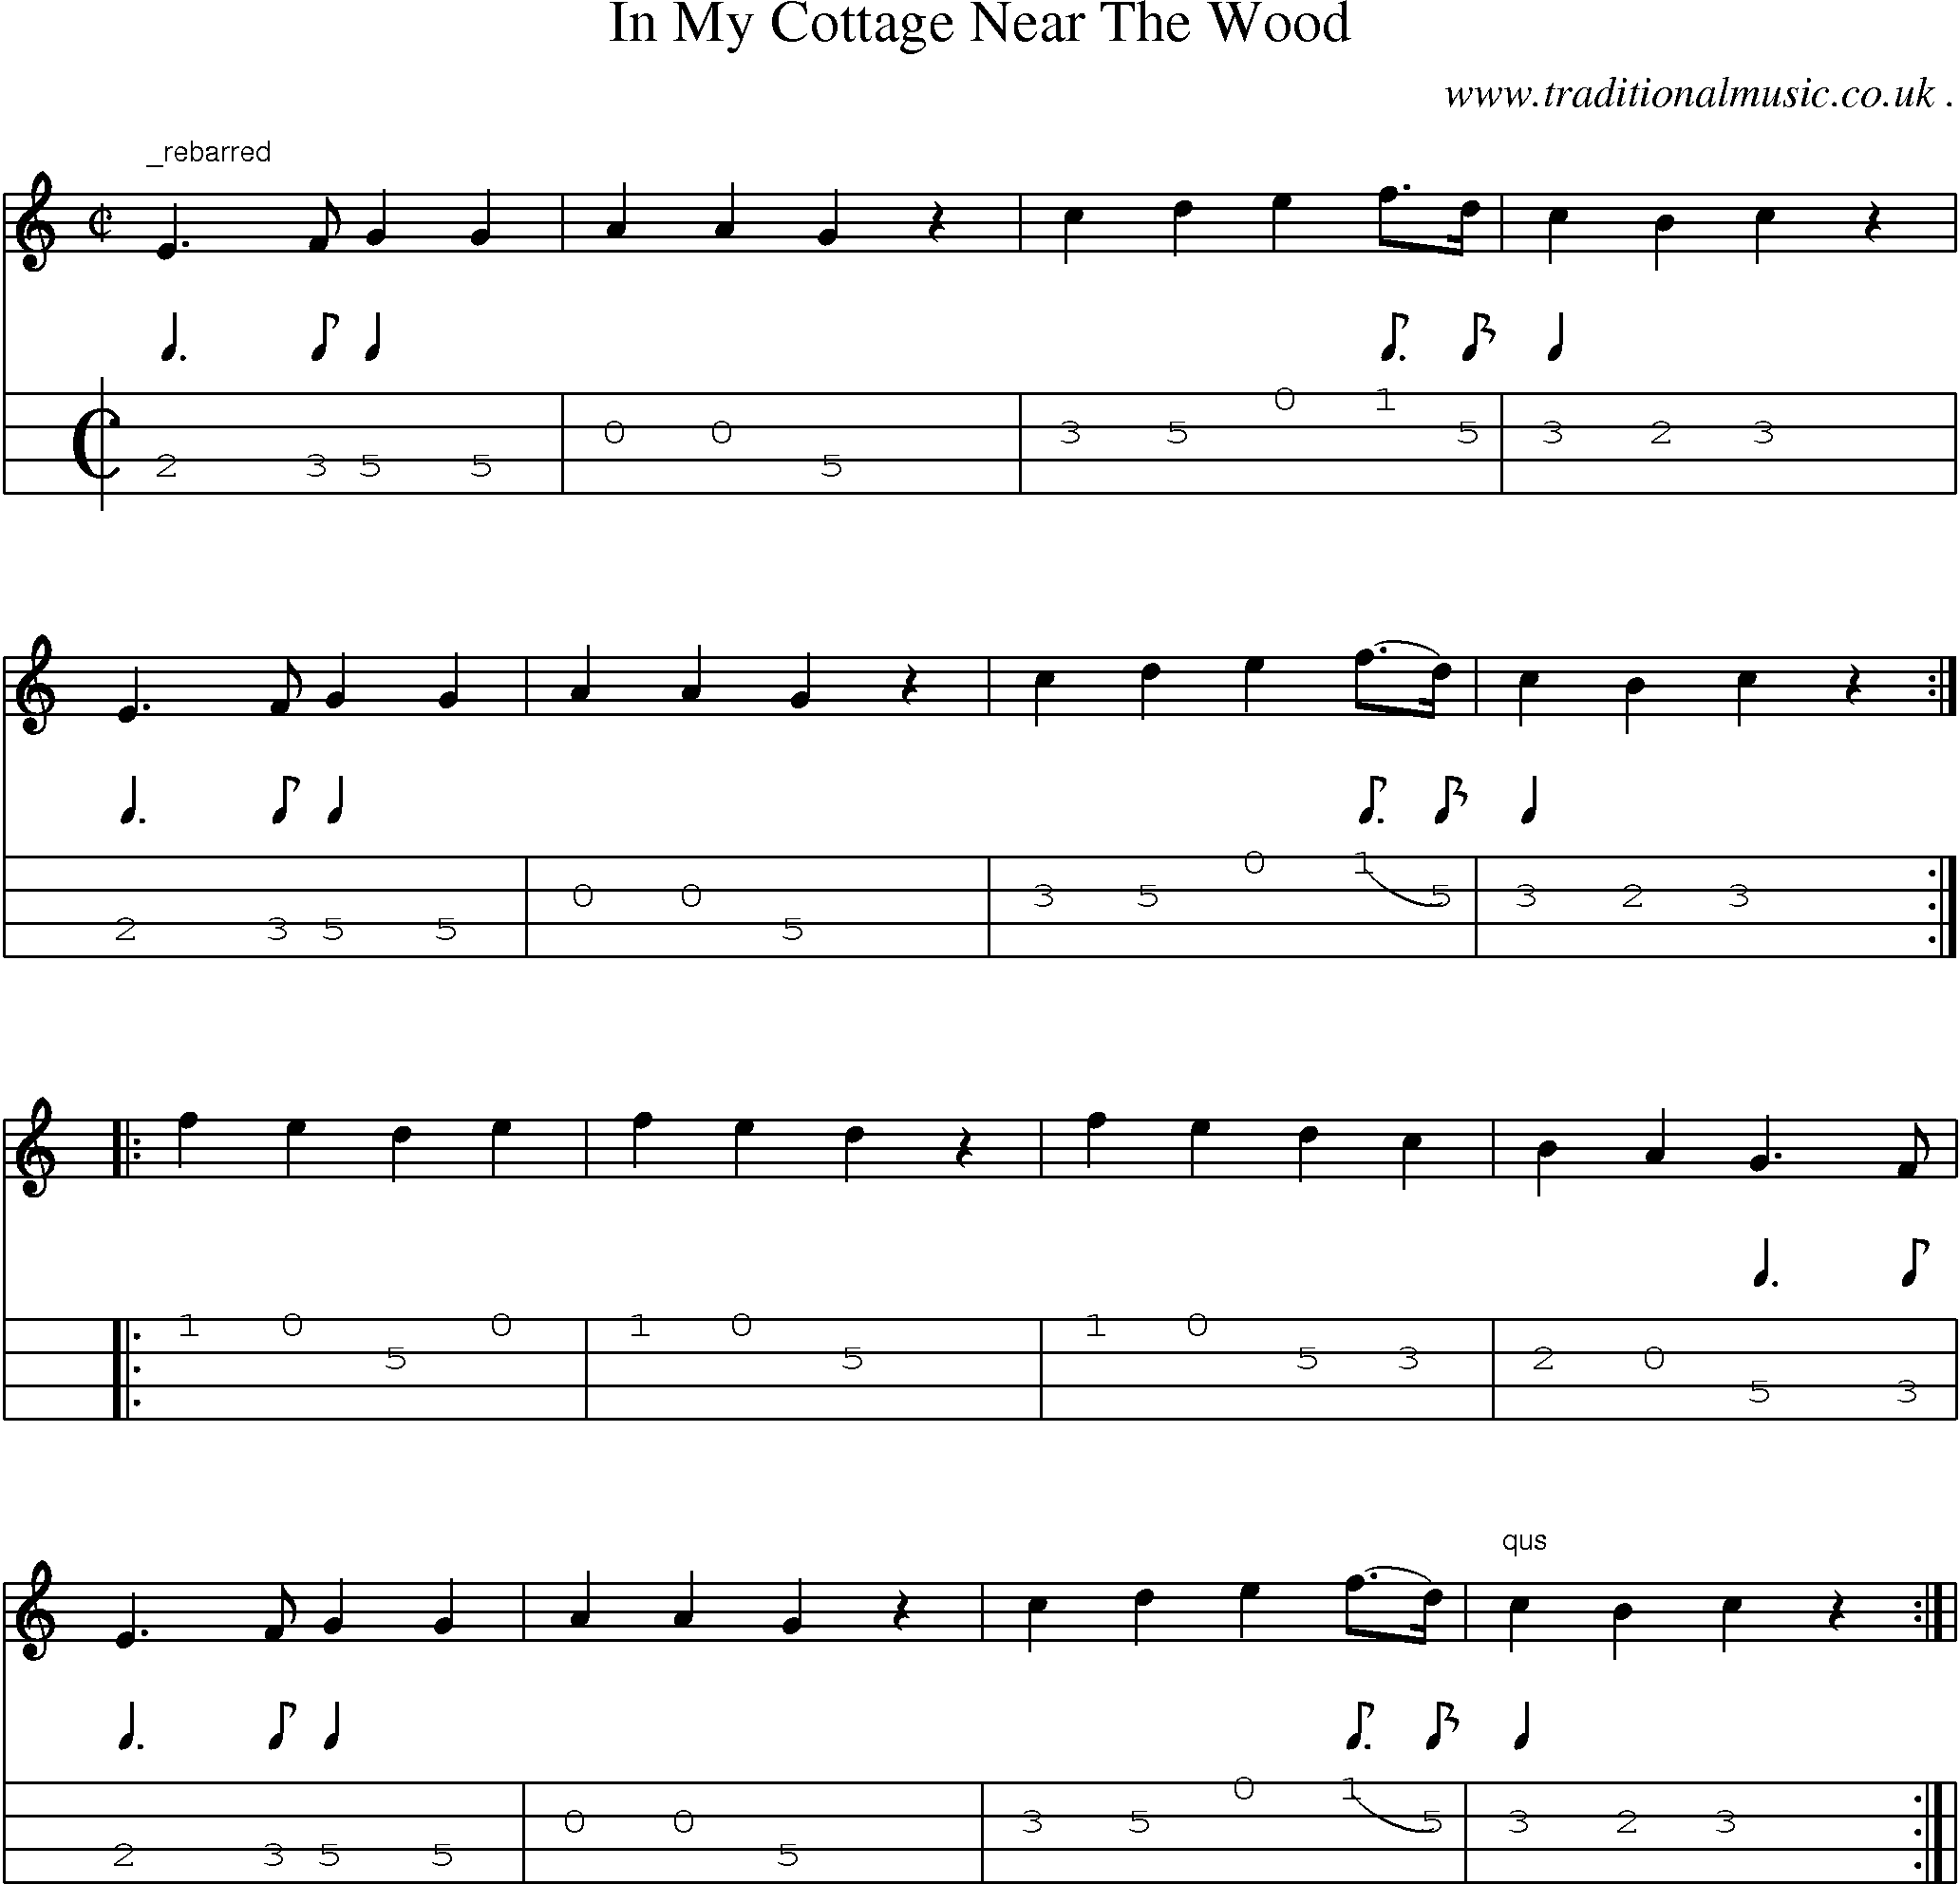 Sheet-Music and Mandolin Tabs for In My Cottage Near The Wood